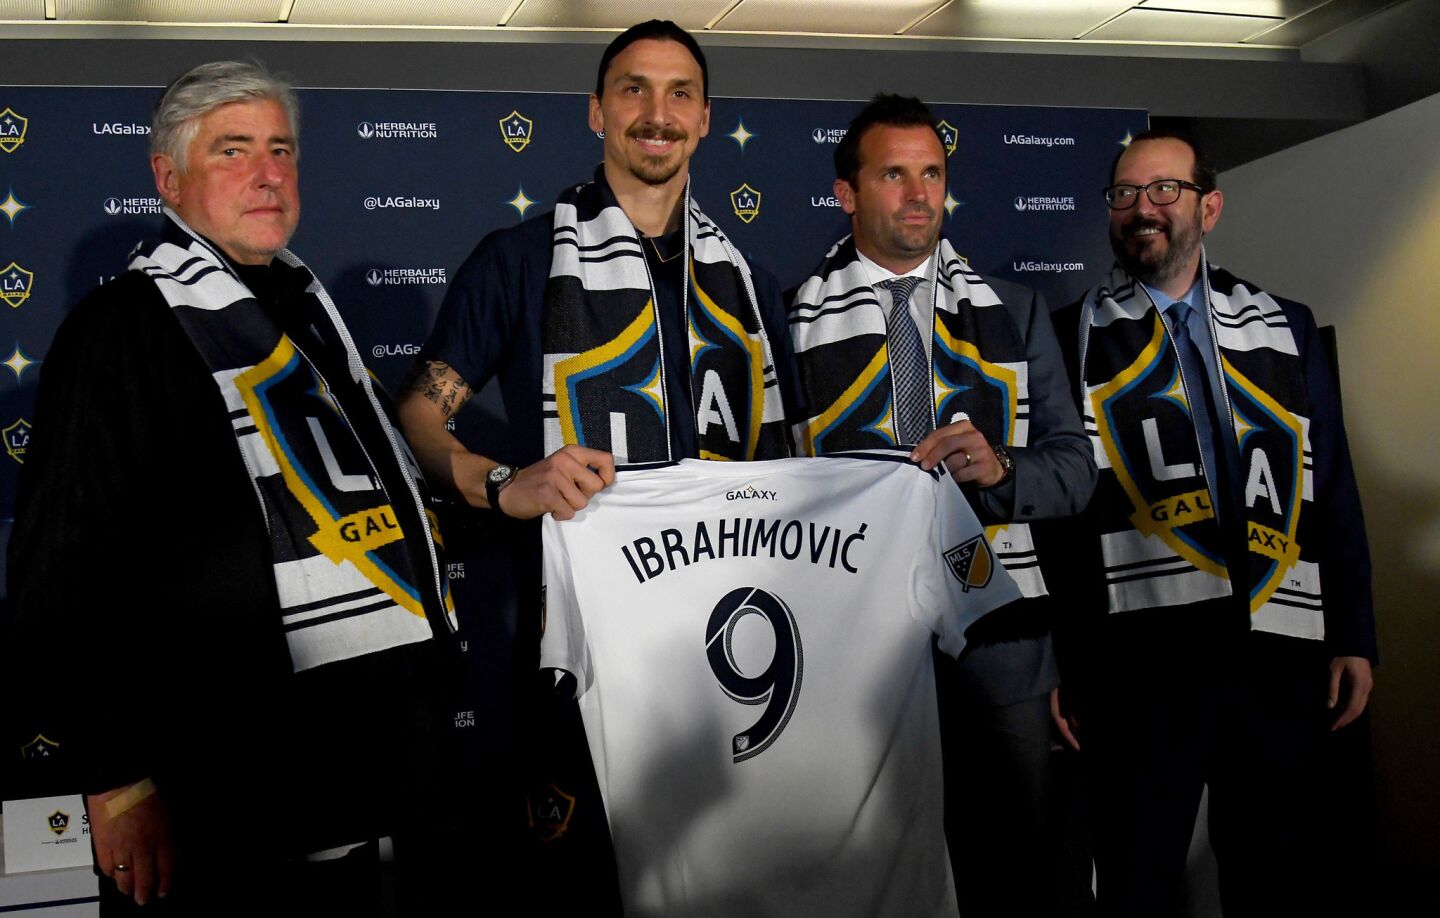 CARSON, CA - MARCH 30: Zlatan Ibrahimovic #9 of the Los Angeles Galaxy holds his jersey as he stands with head coach Sigi Schmid, team president Chris Klein and President and CEO of AEG Dan Beckerman during a press conference at StubHub Center on March 30, 2018 in Carson, California. (Photo by Jayne Kamin-Oncea/Getty Images) ** OUTS - ELSENT, FPG, CM - OUTS * NM, PH, VA if sourced by CT, LA or MoD **